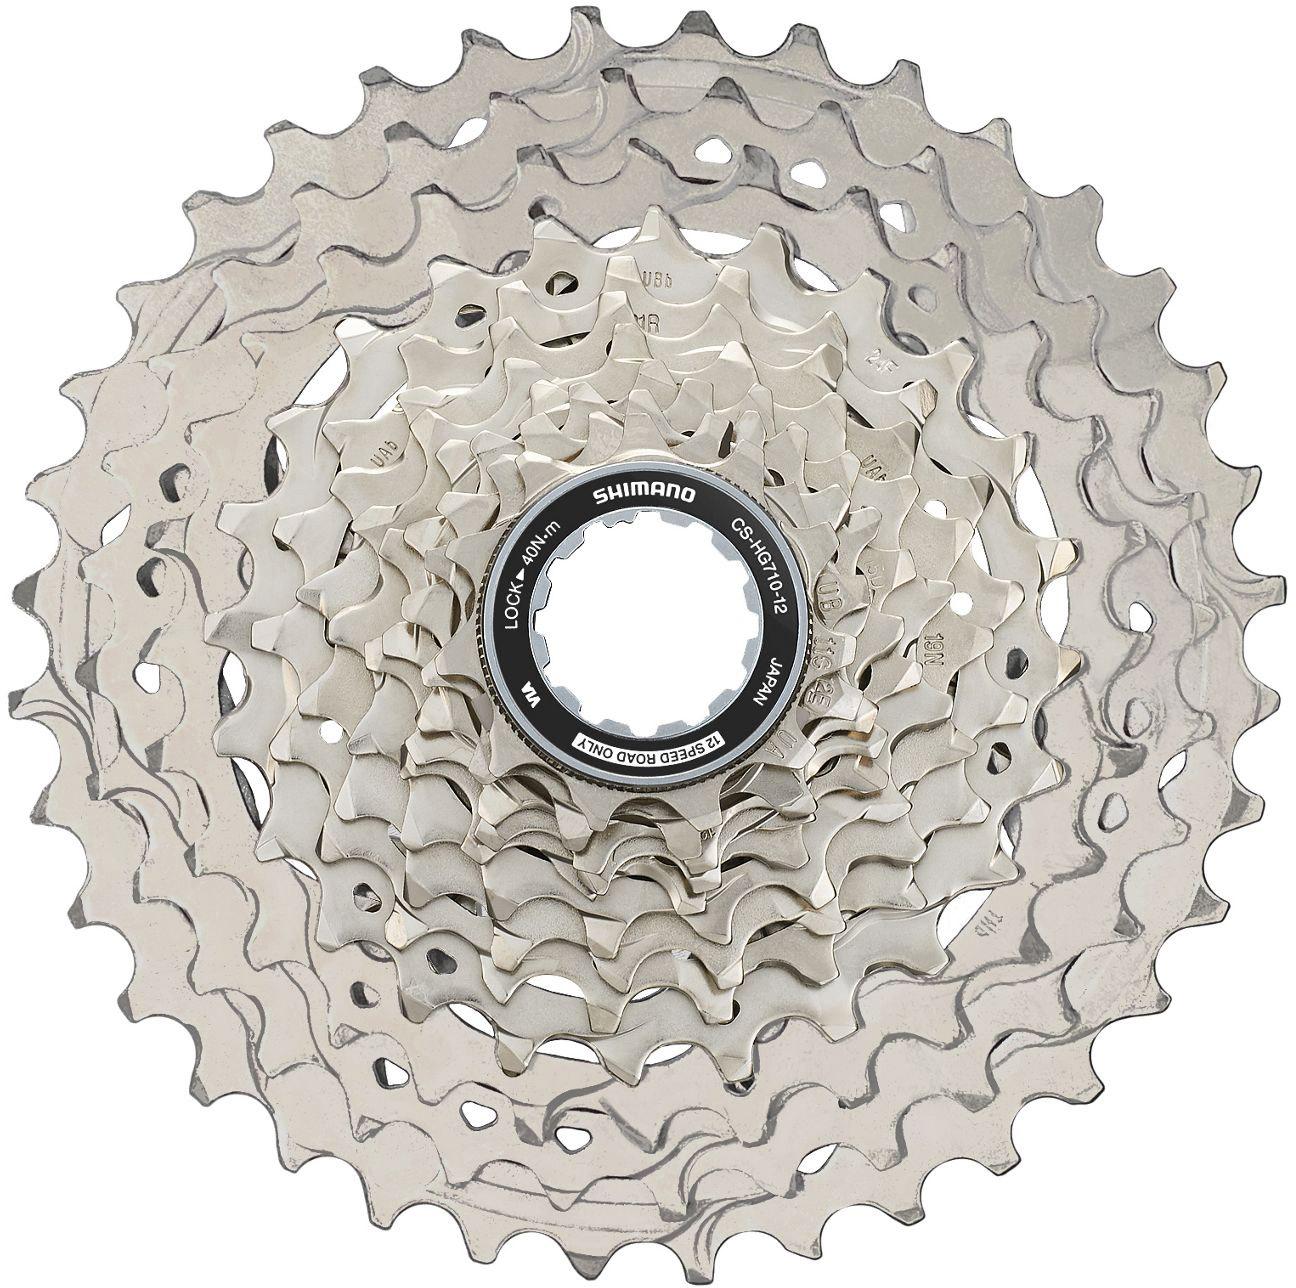 Shimano Hg710 12 Speed Cassette - Silver